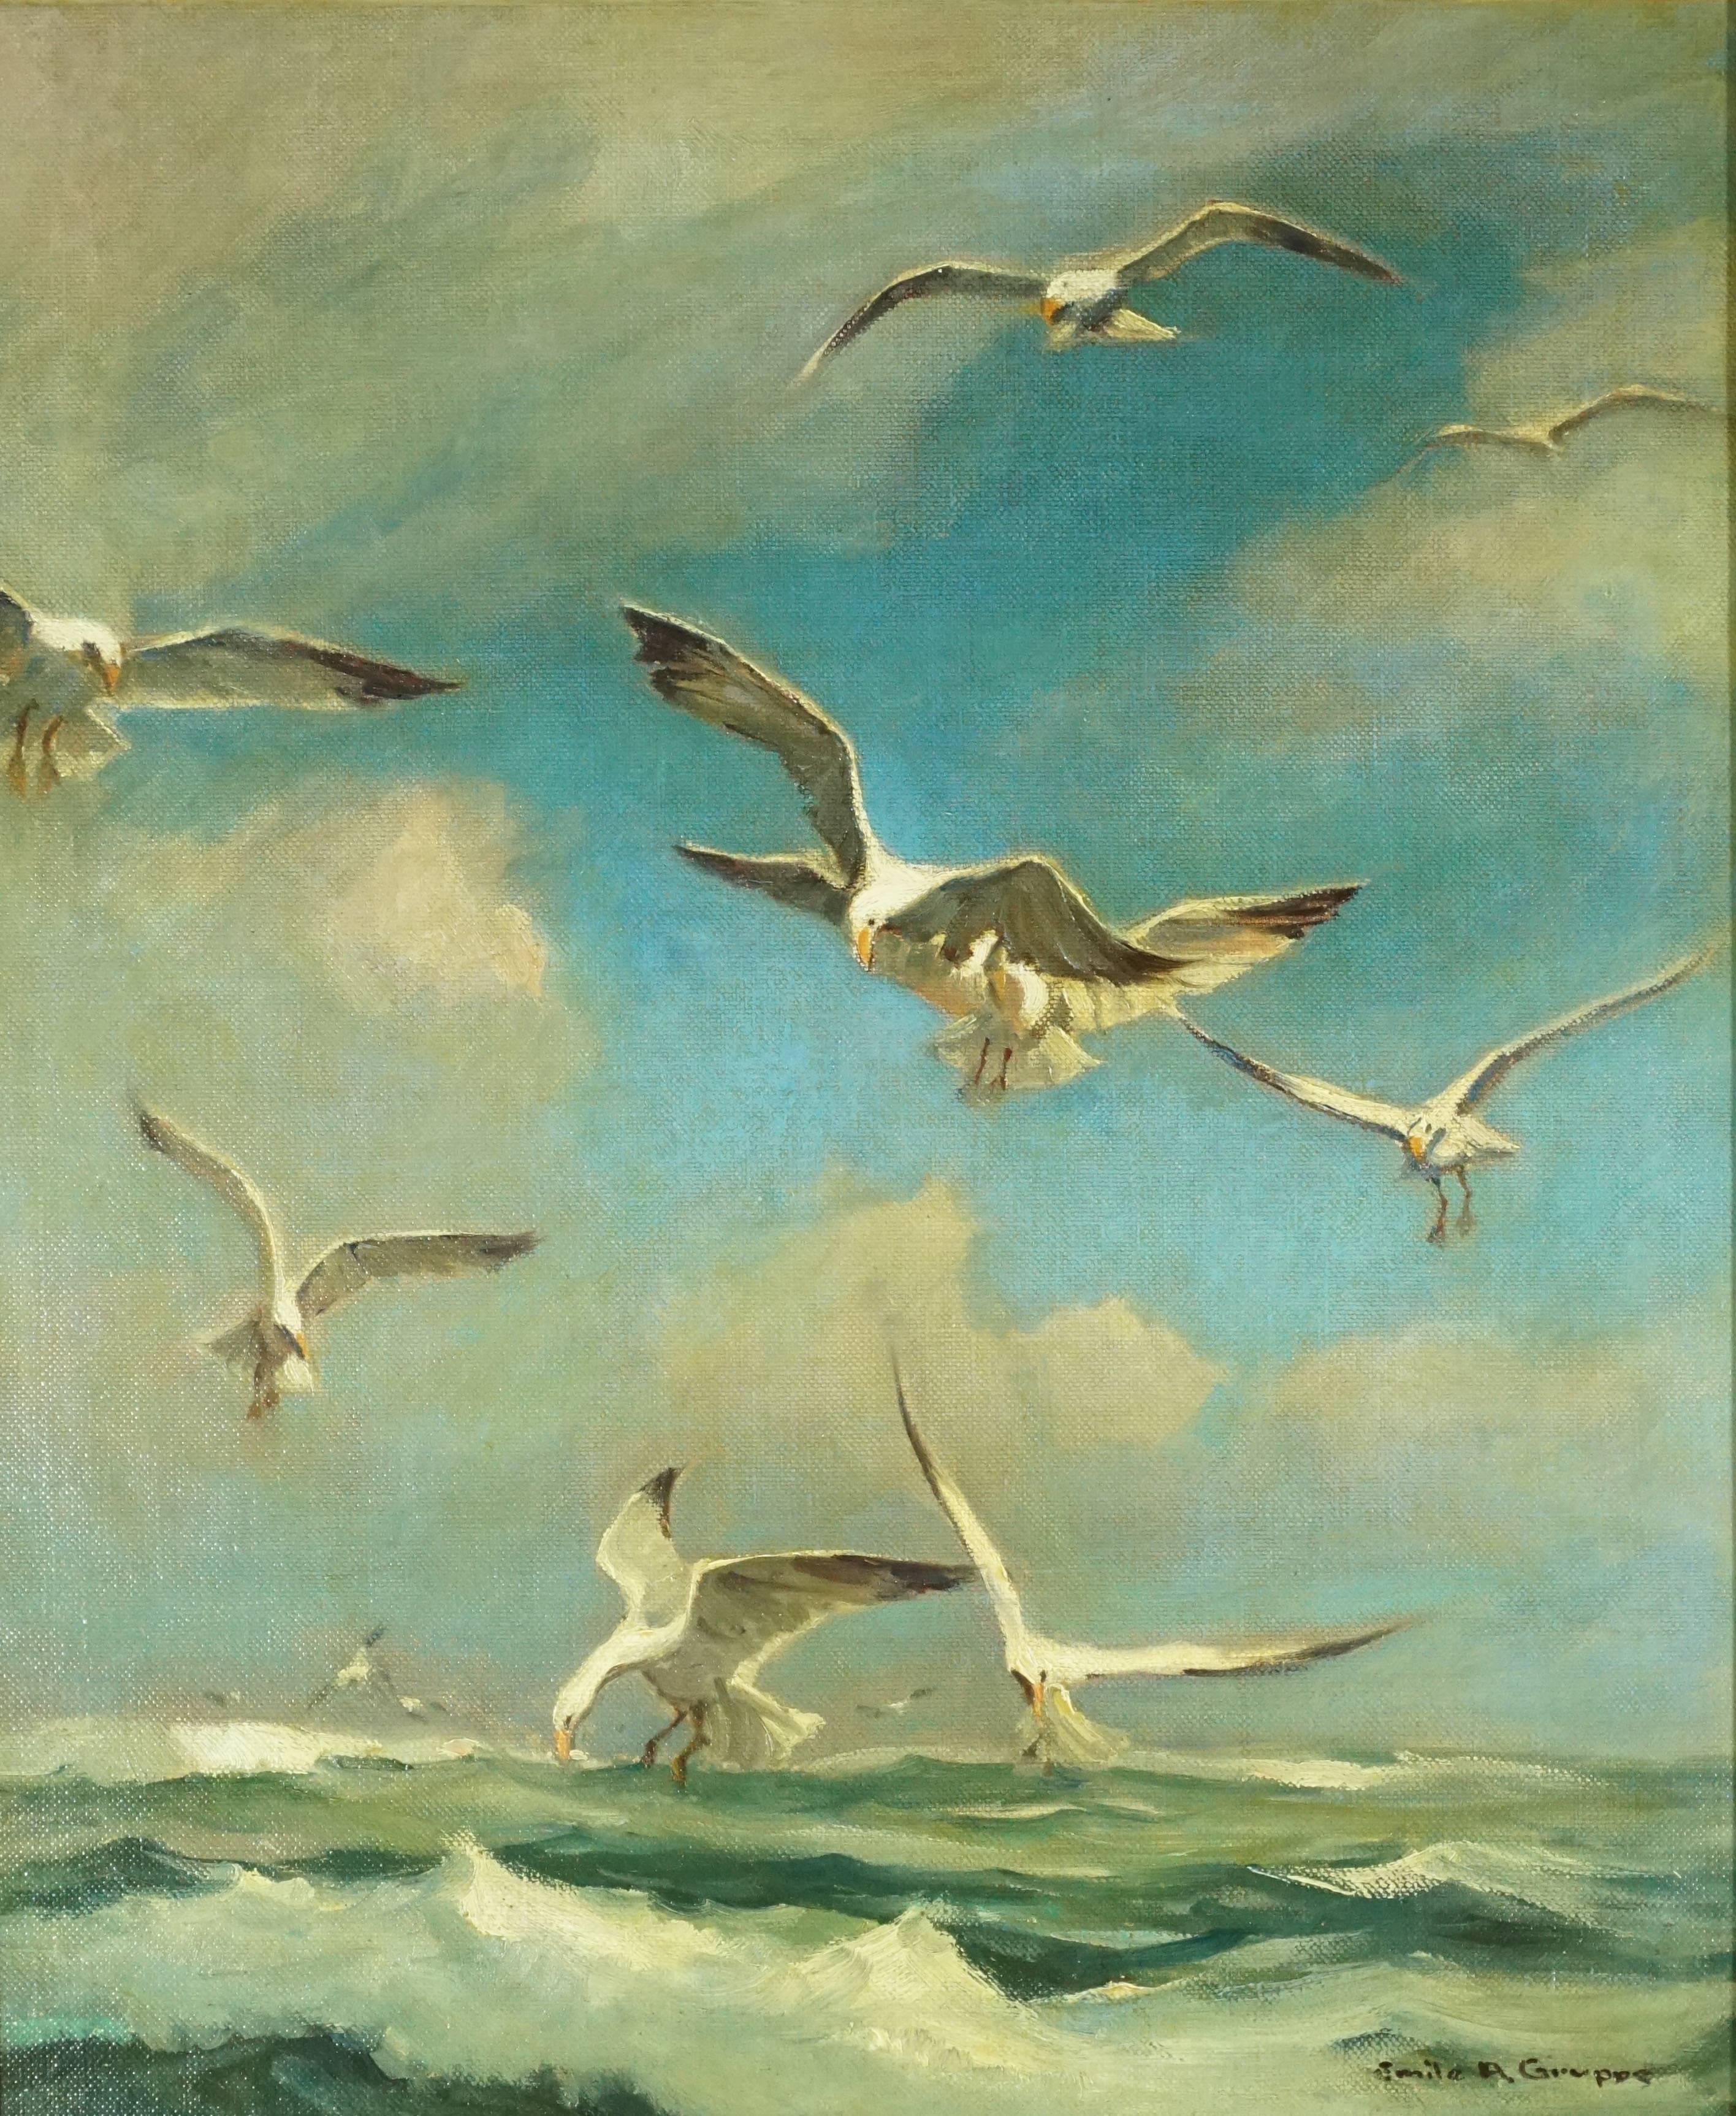 Emile Albert Gruppe (1896-1978) oil on canvas, circa 1948, Mid-Century.

Seagulls on the waves with turbulent seas. A beautiful scene that is moving and alive. Most probably painted off Cape Ann near Bass Rocks near  Gloucester!

Canvas: 25 X 30